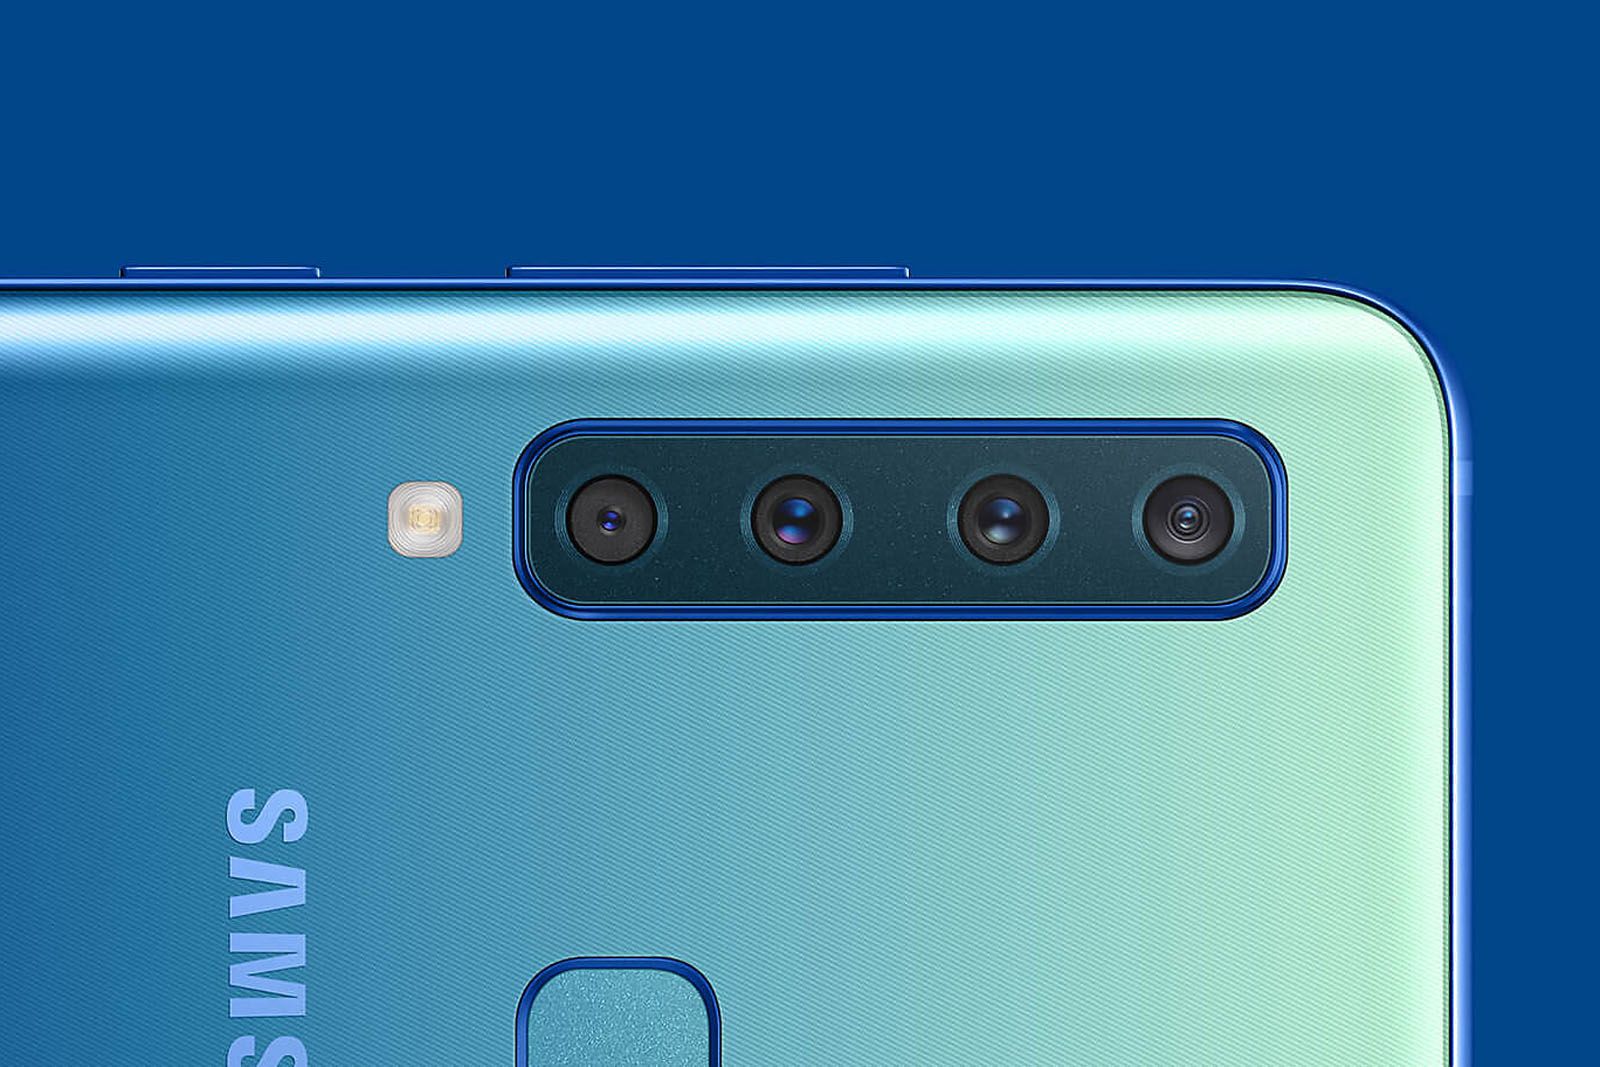 Smartphone Cameras Are In A Tailspin image 1